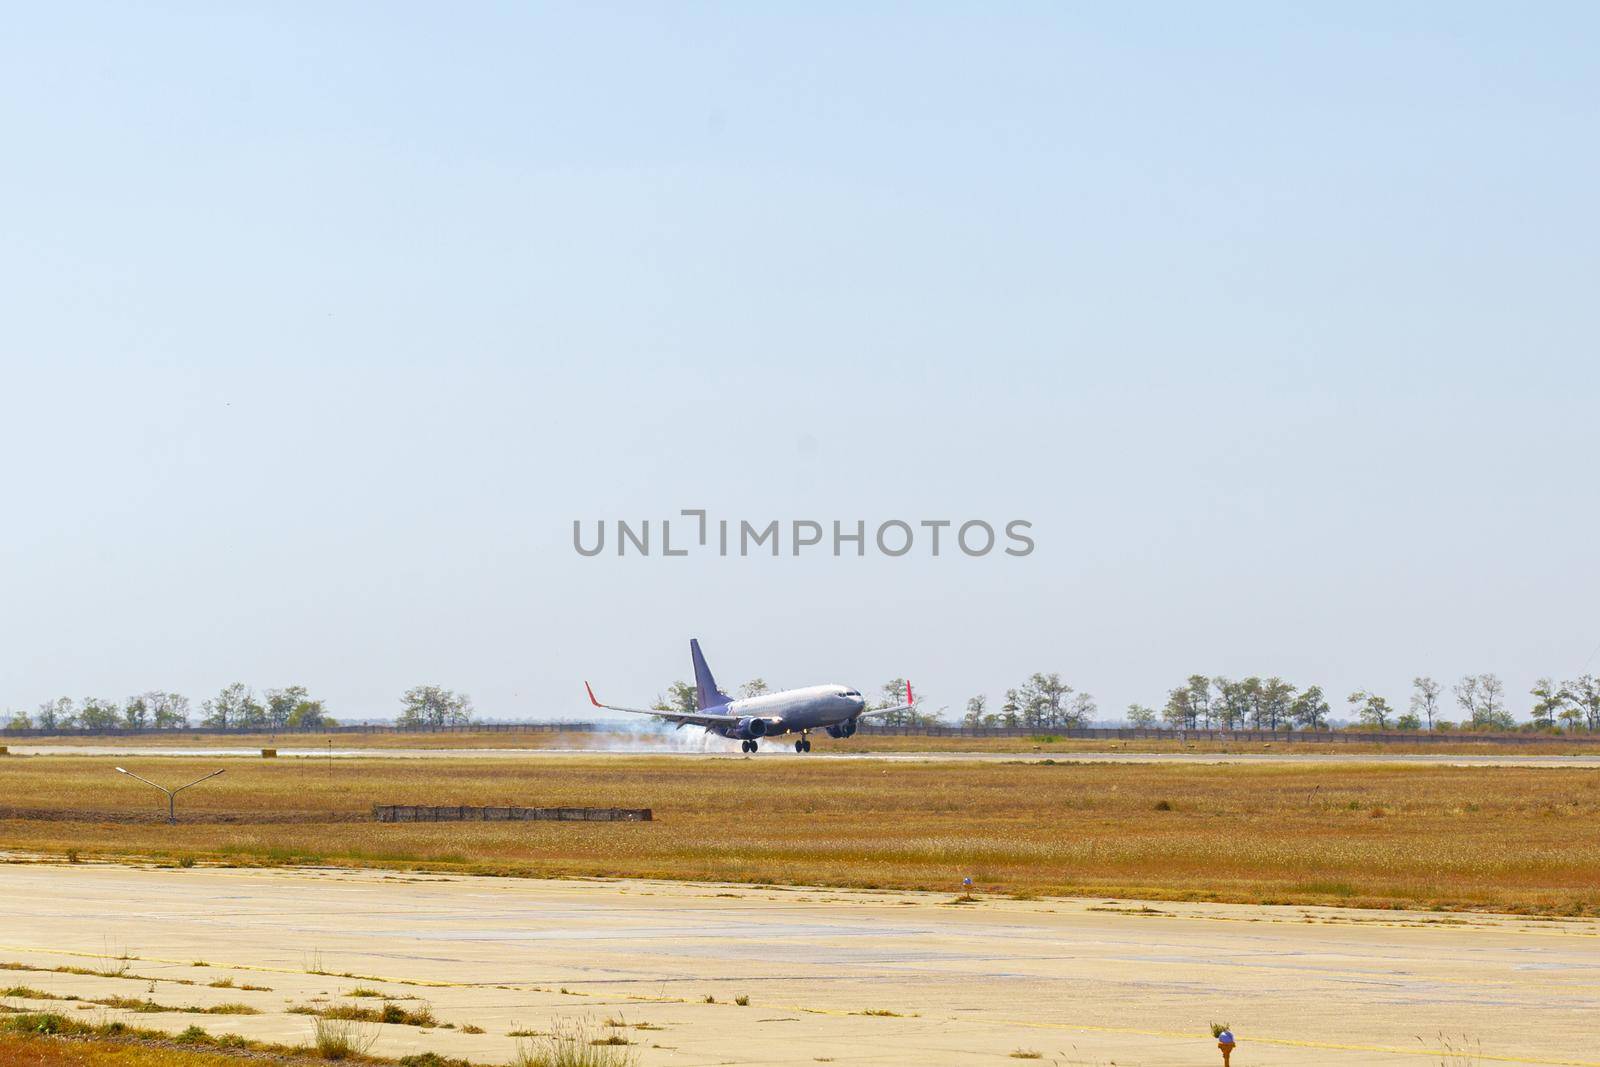 Passenger plane taking off from runway at airport on sunny day photo